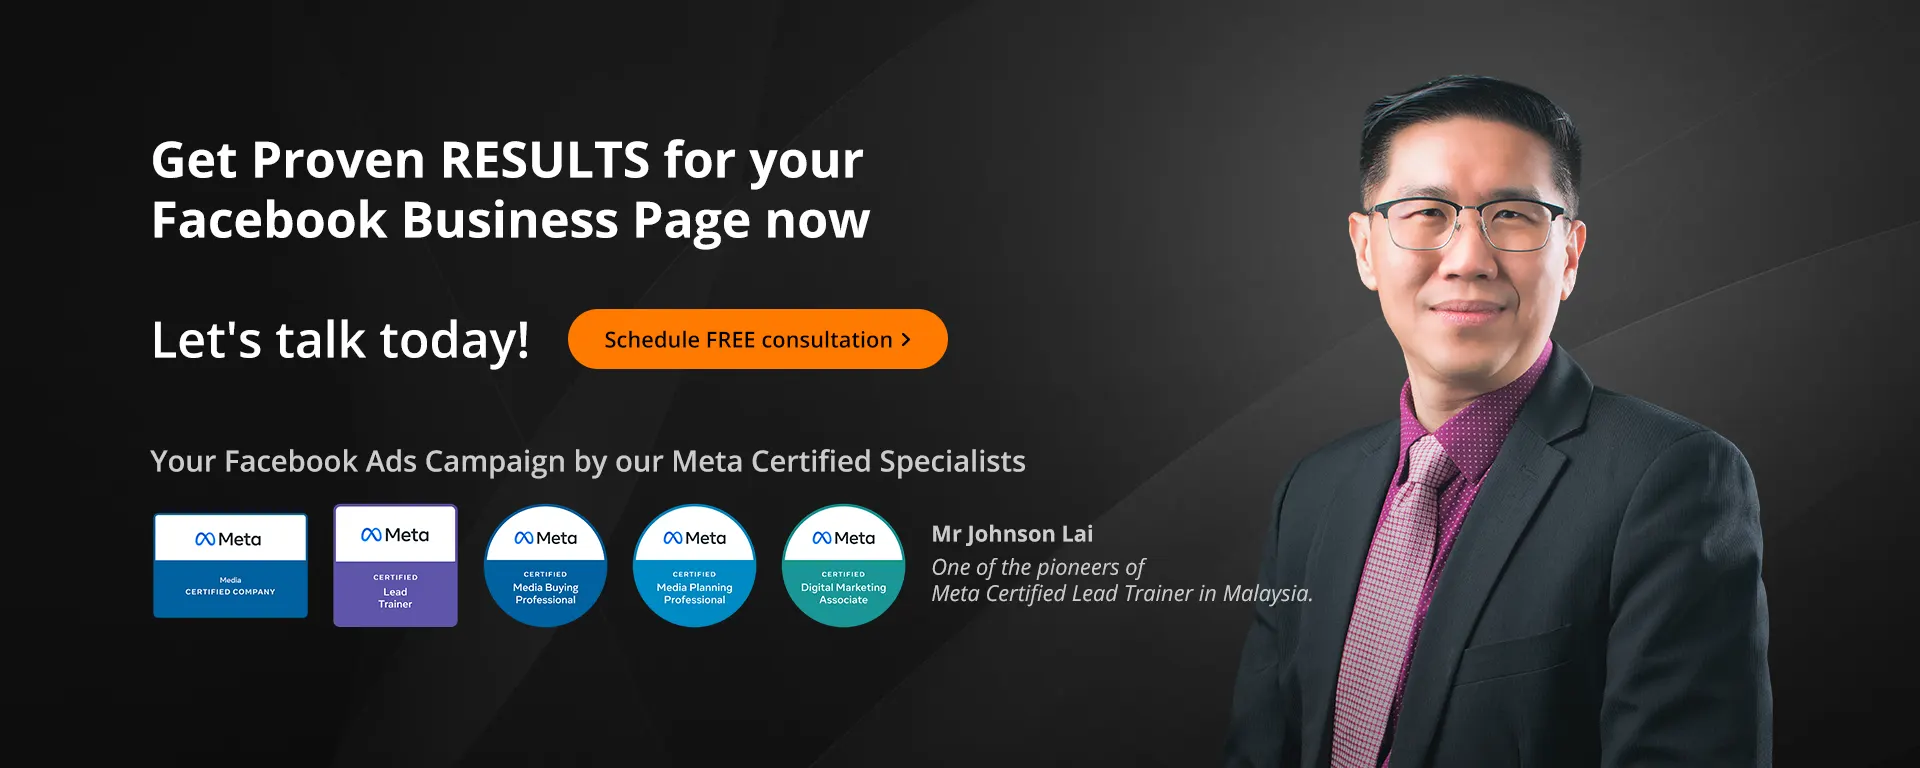 Schedule a free consultation with our META certified specialists